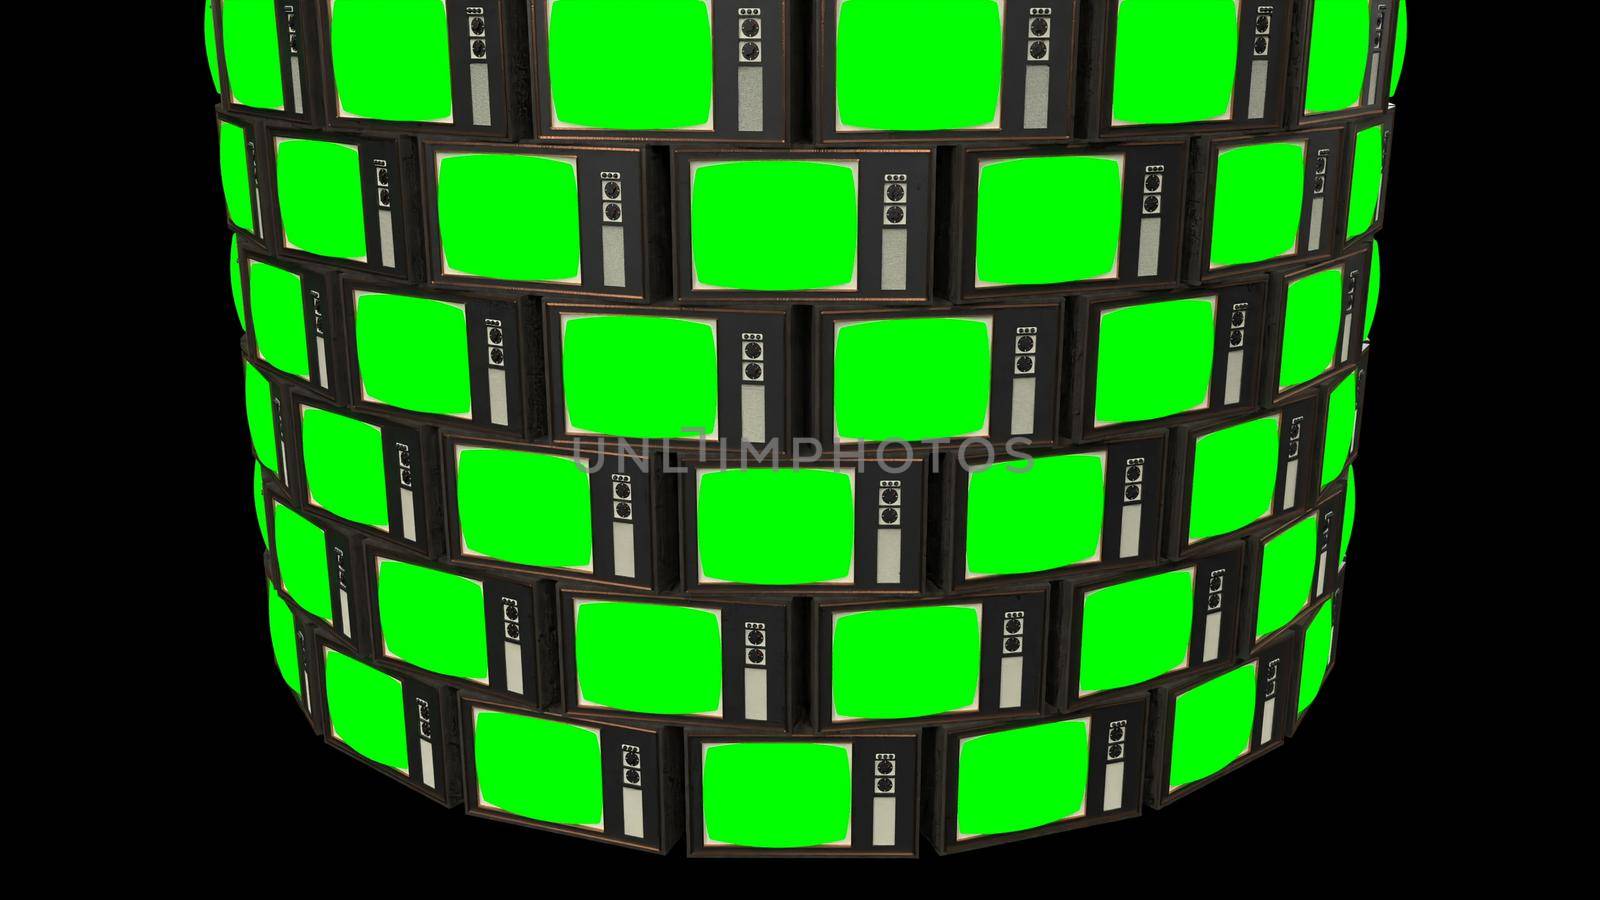 Old tv green screen Retro 80s 90s vintage background. Chroma key 3d render by Zozulinskyi